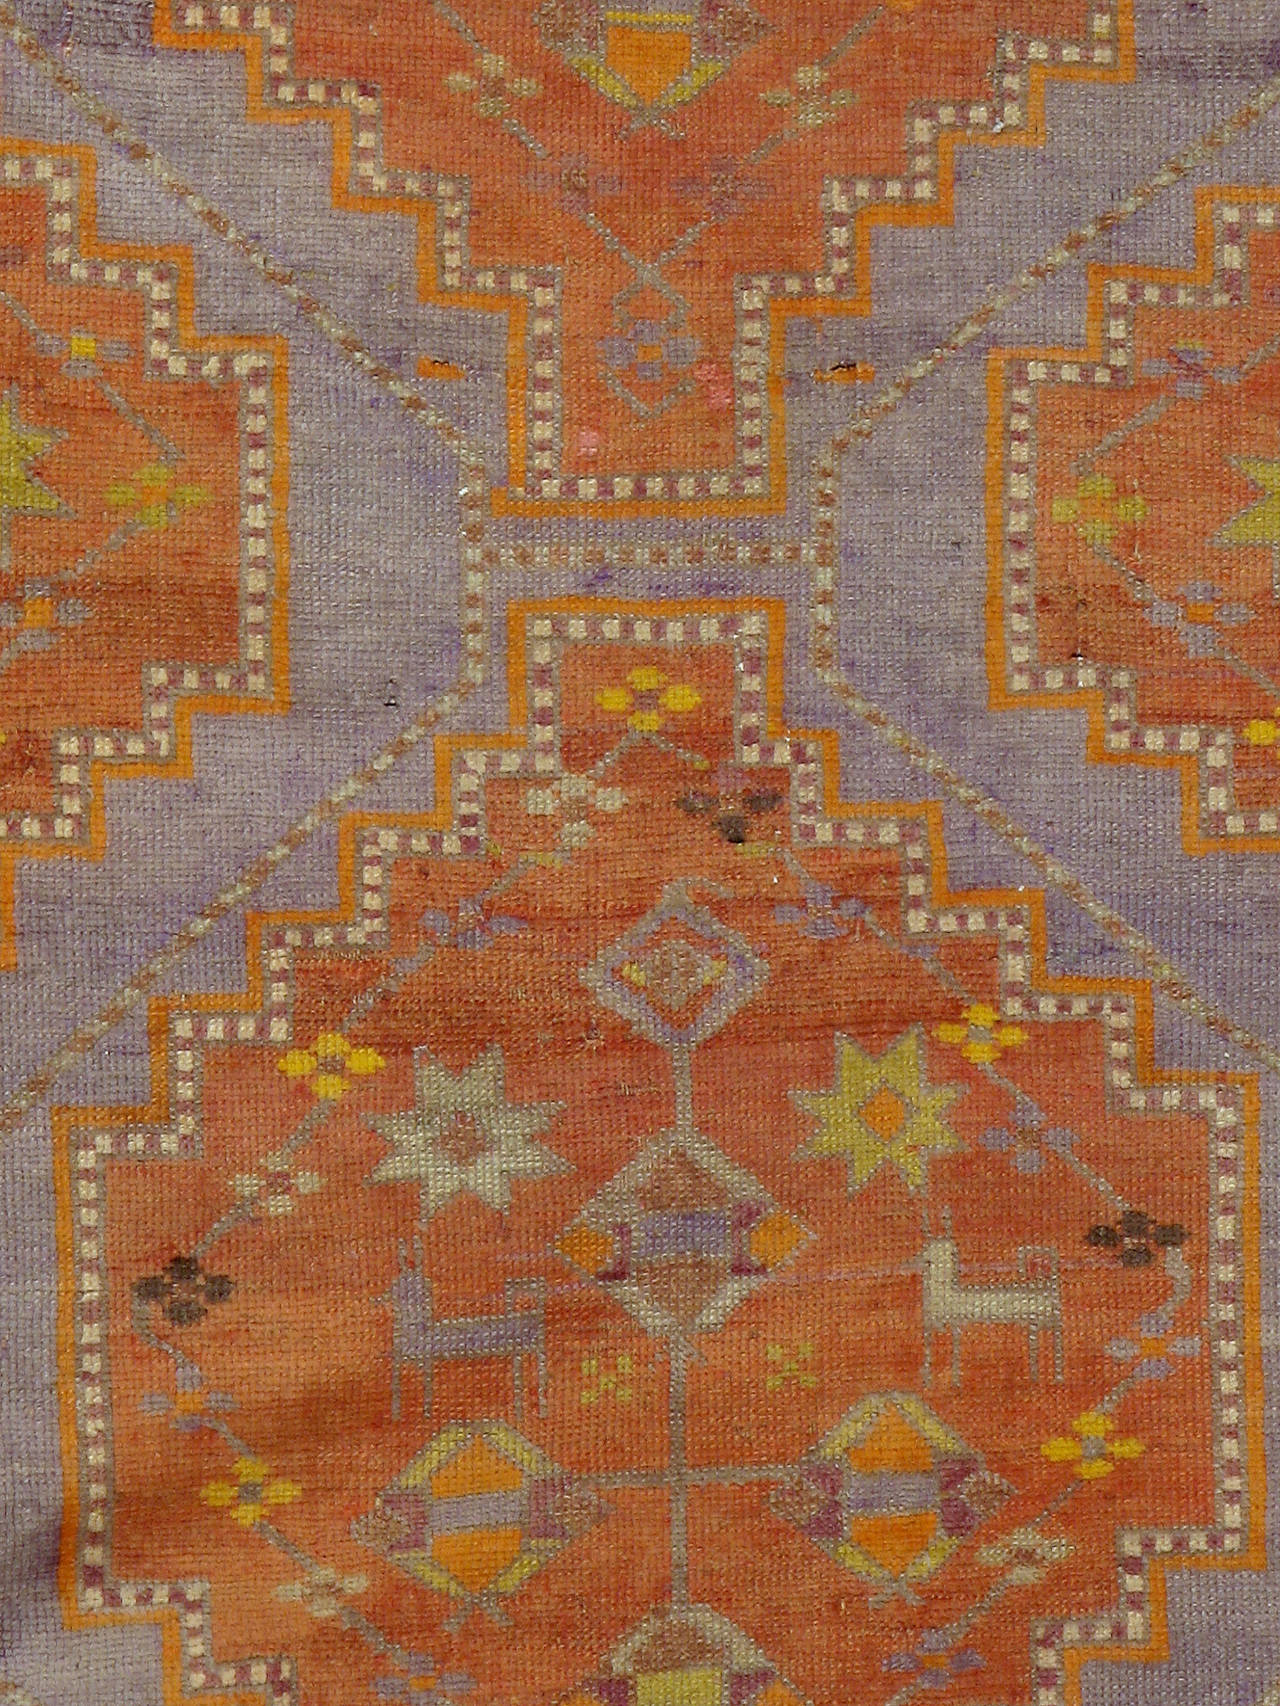 An antique Russian Karabagh carpet from the first quarter of the 20th century.